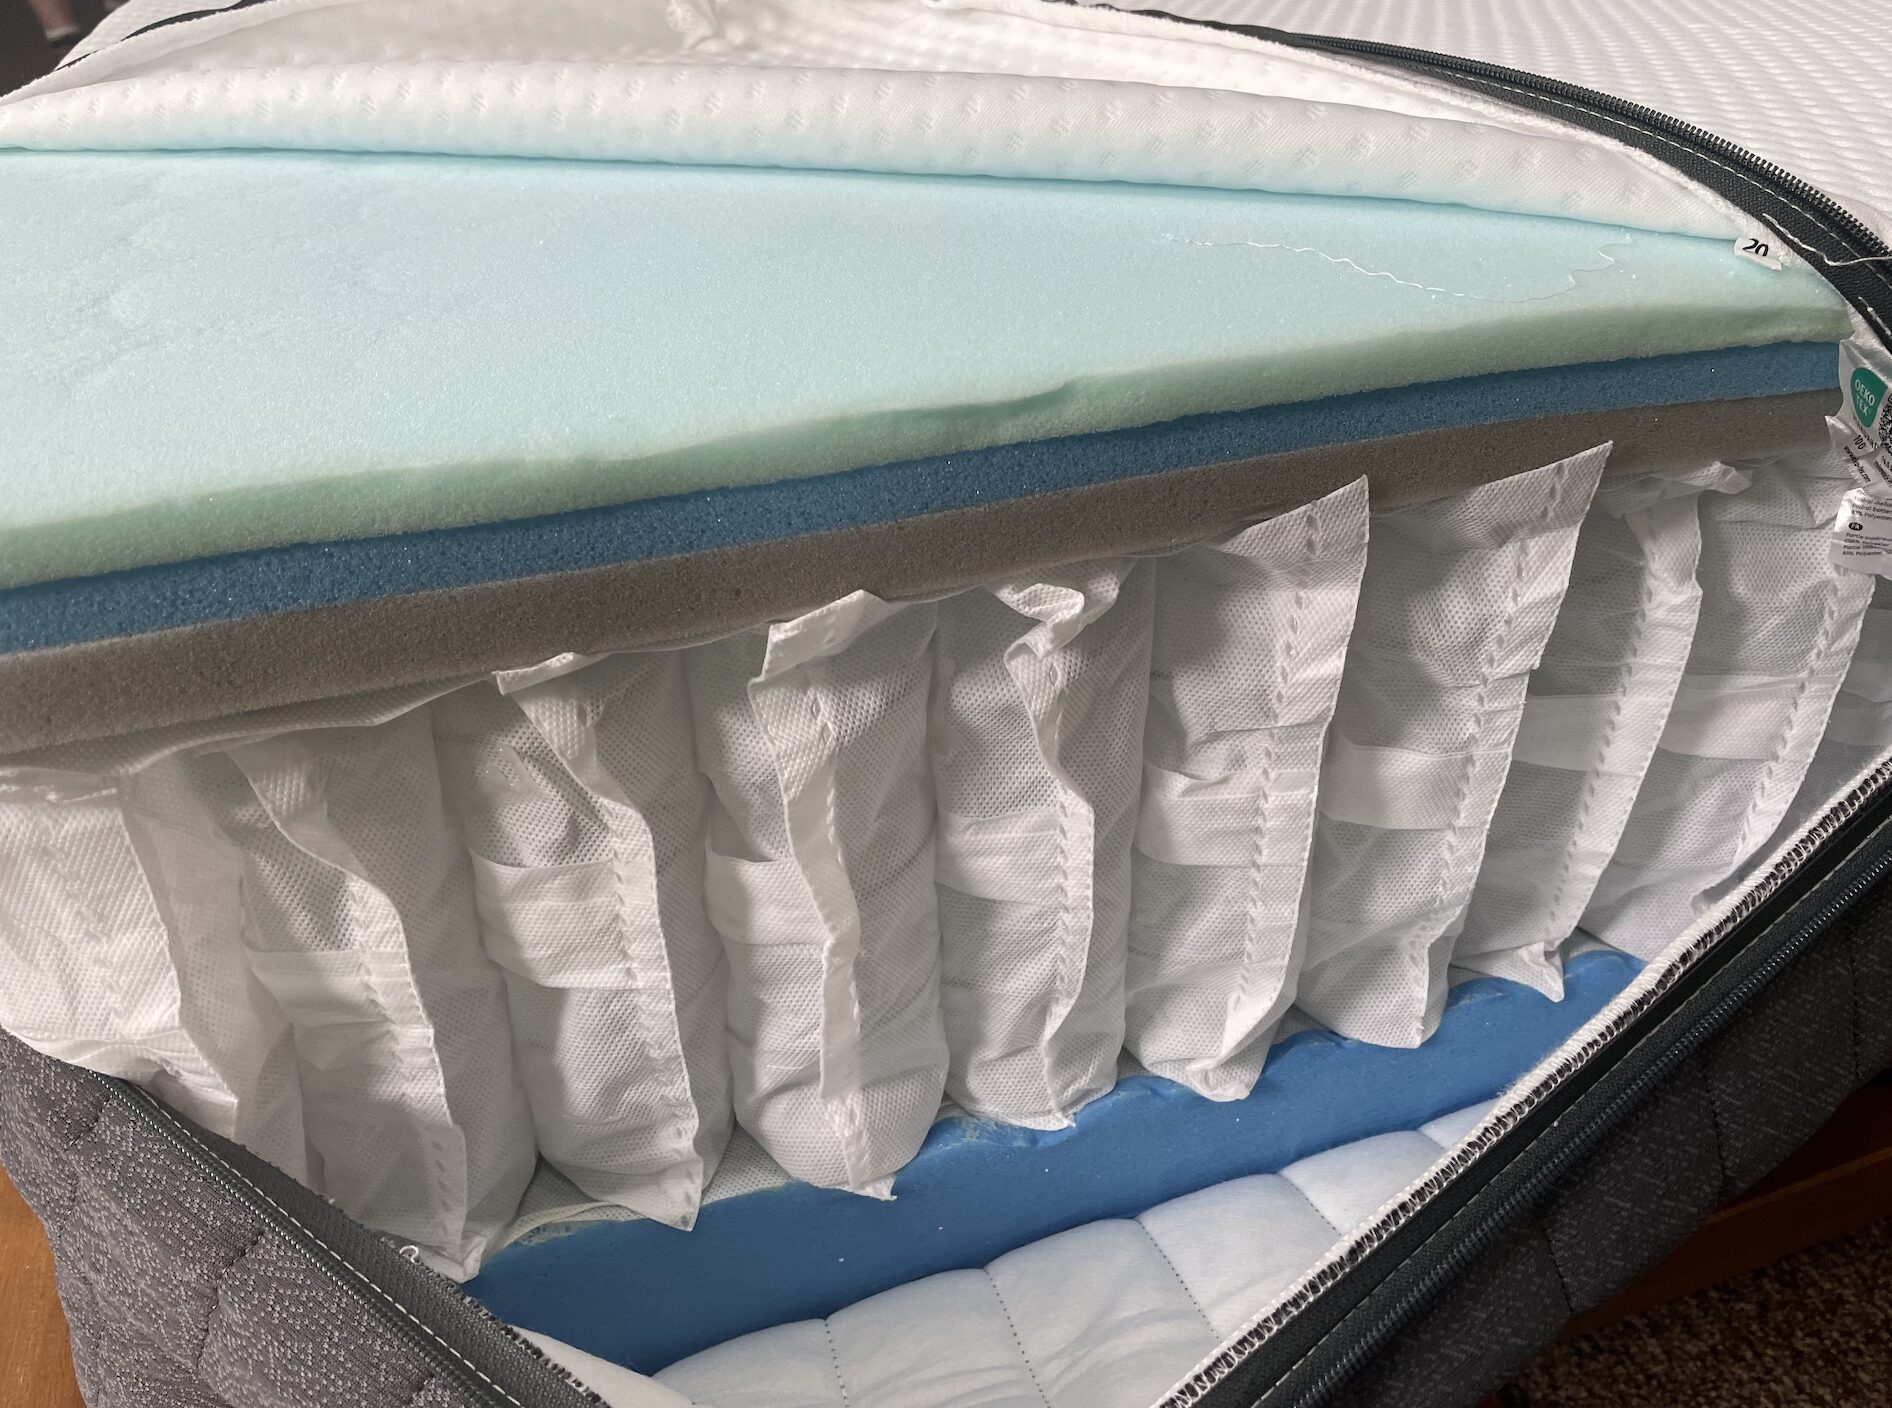  Inside view of an Emma Hybrid mattress showing coils and foam layers